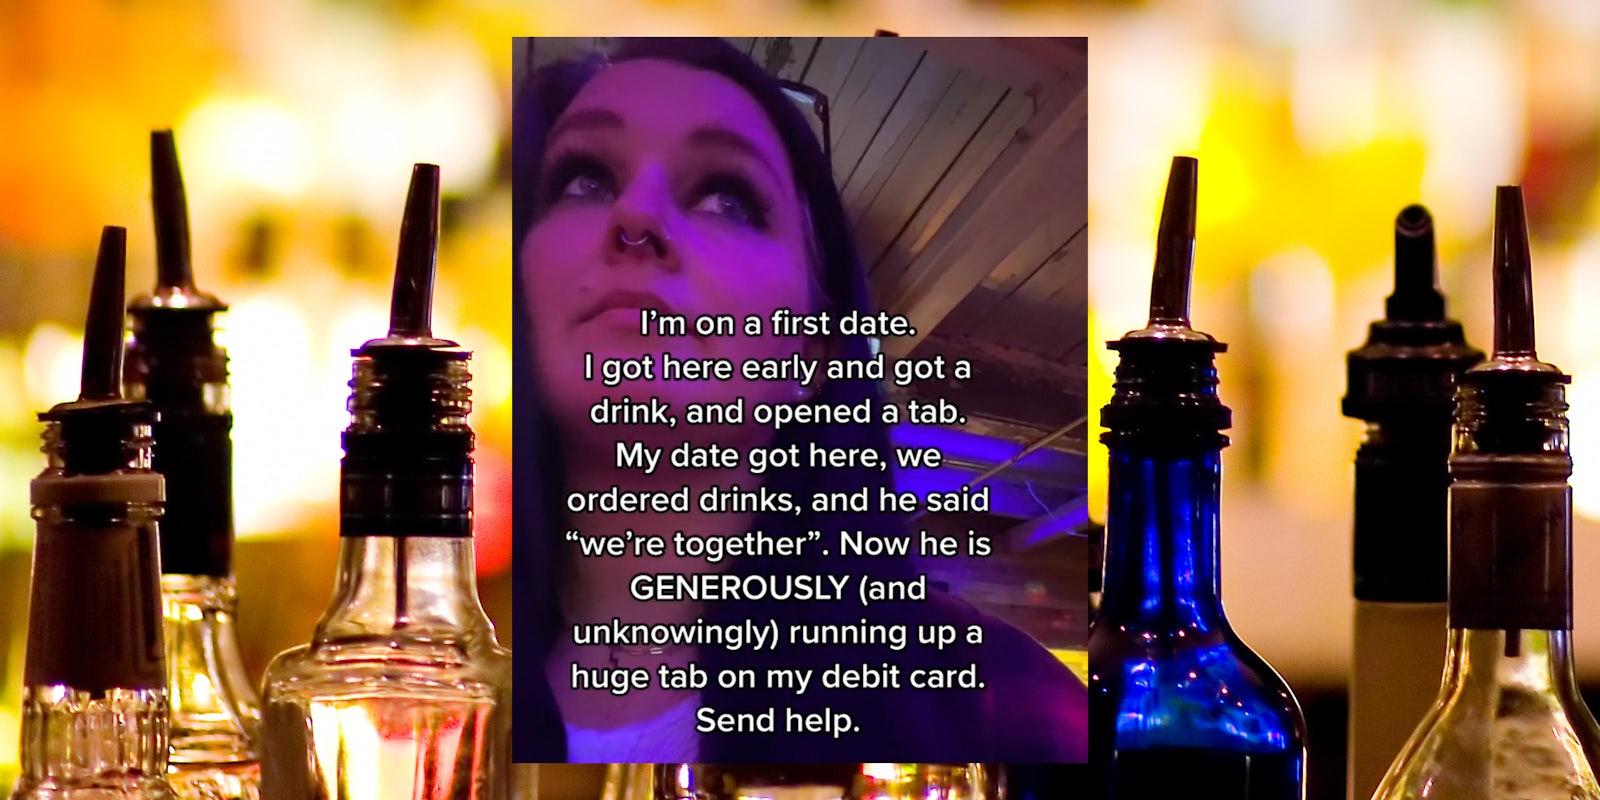 Young woman in bar with caption 'i'm on a first date. i got here early and got a drink, and opened a tab. my date got here, we ordered drinks, and he said 'we're together'. Now he is generously (and unknowingly) running up a huge tab on my debit card. Send help.' over bar bottle background